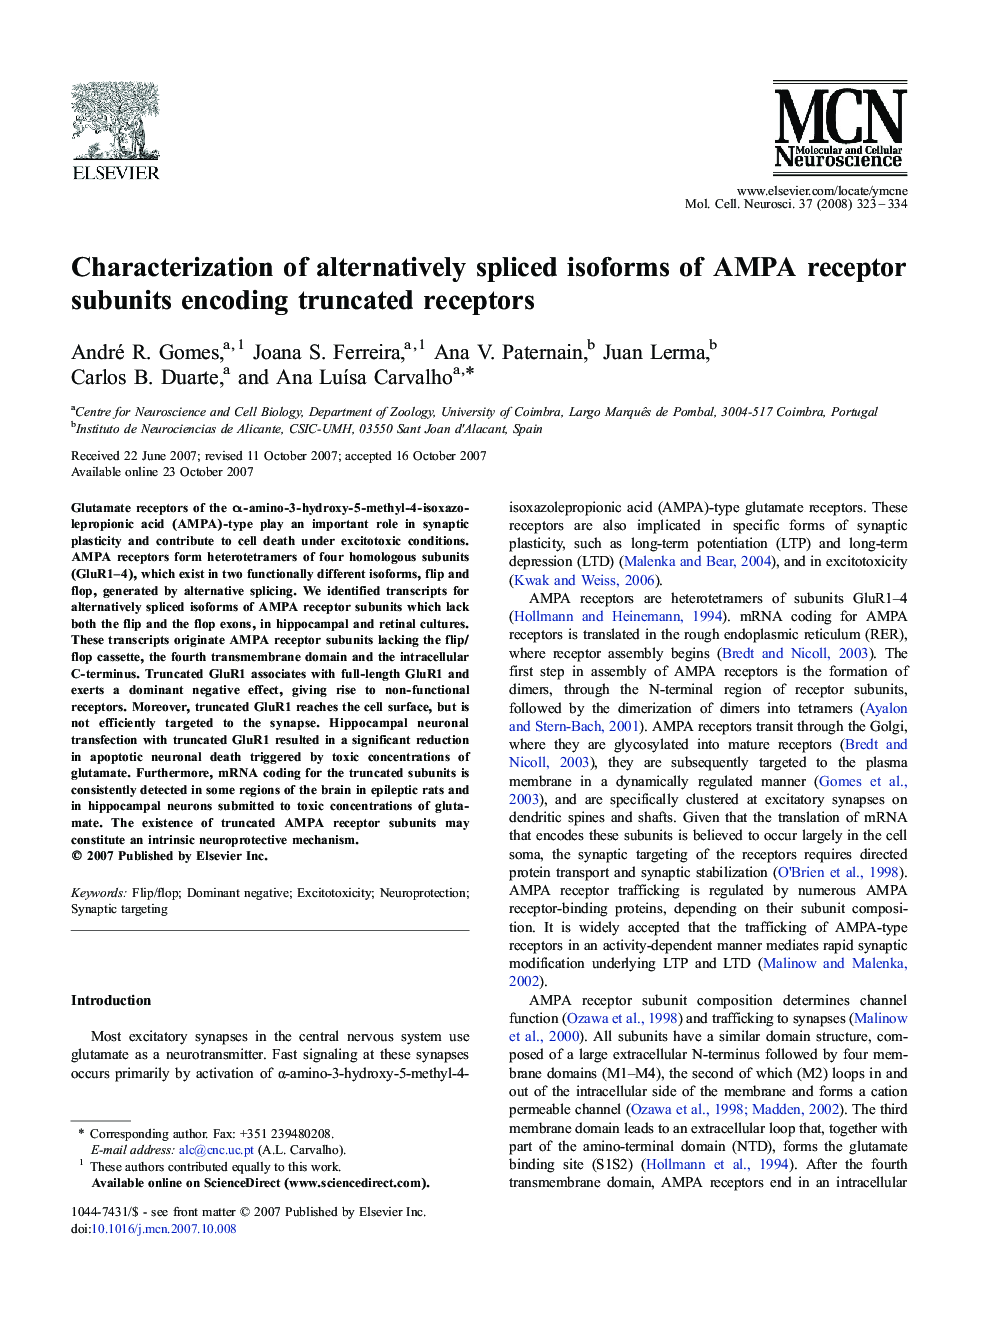 Characterization of alternatively spliced isoforms of AMPA receptor subunits encoding truncated receptors